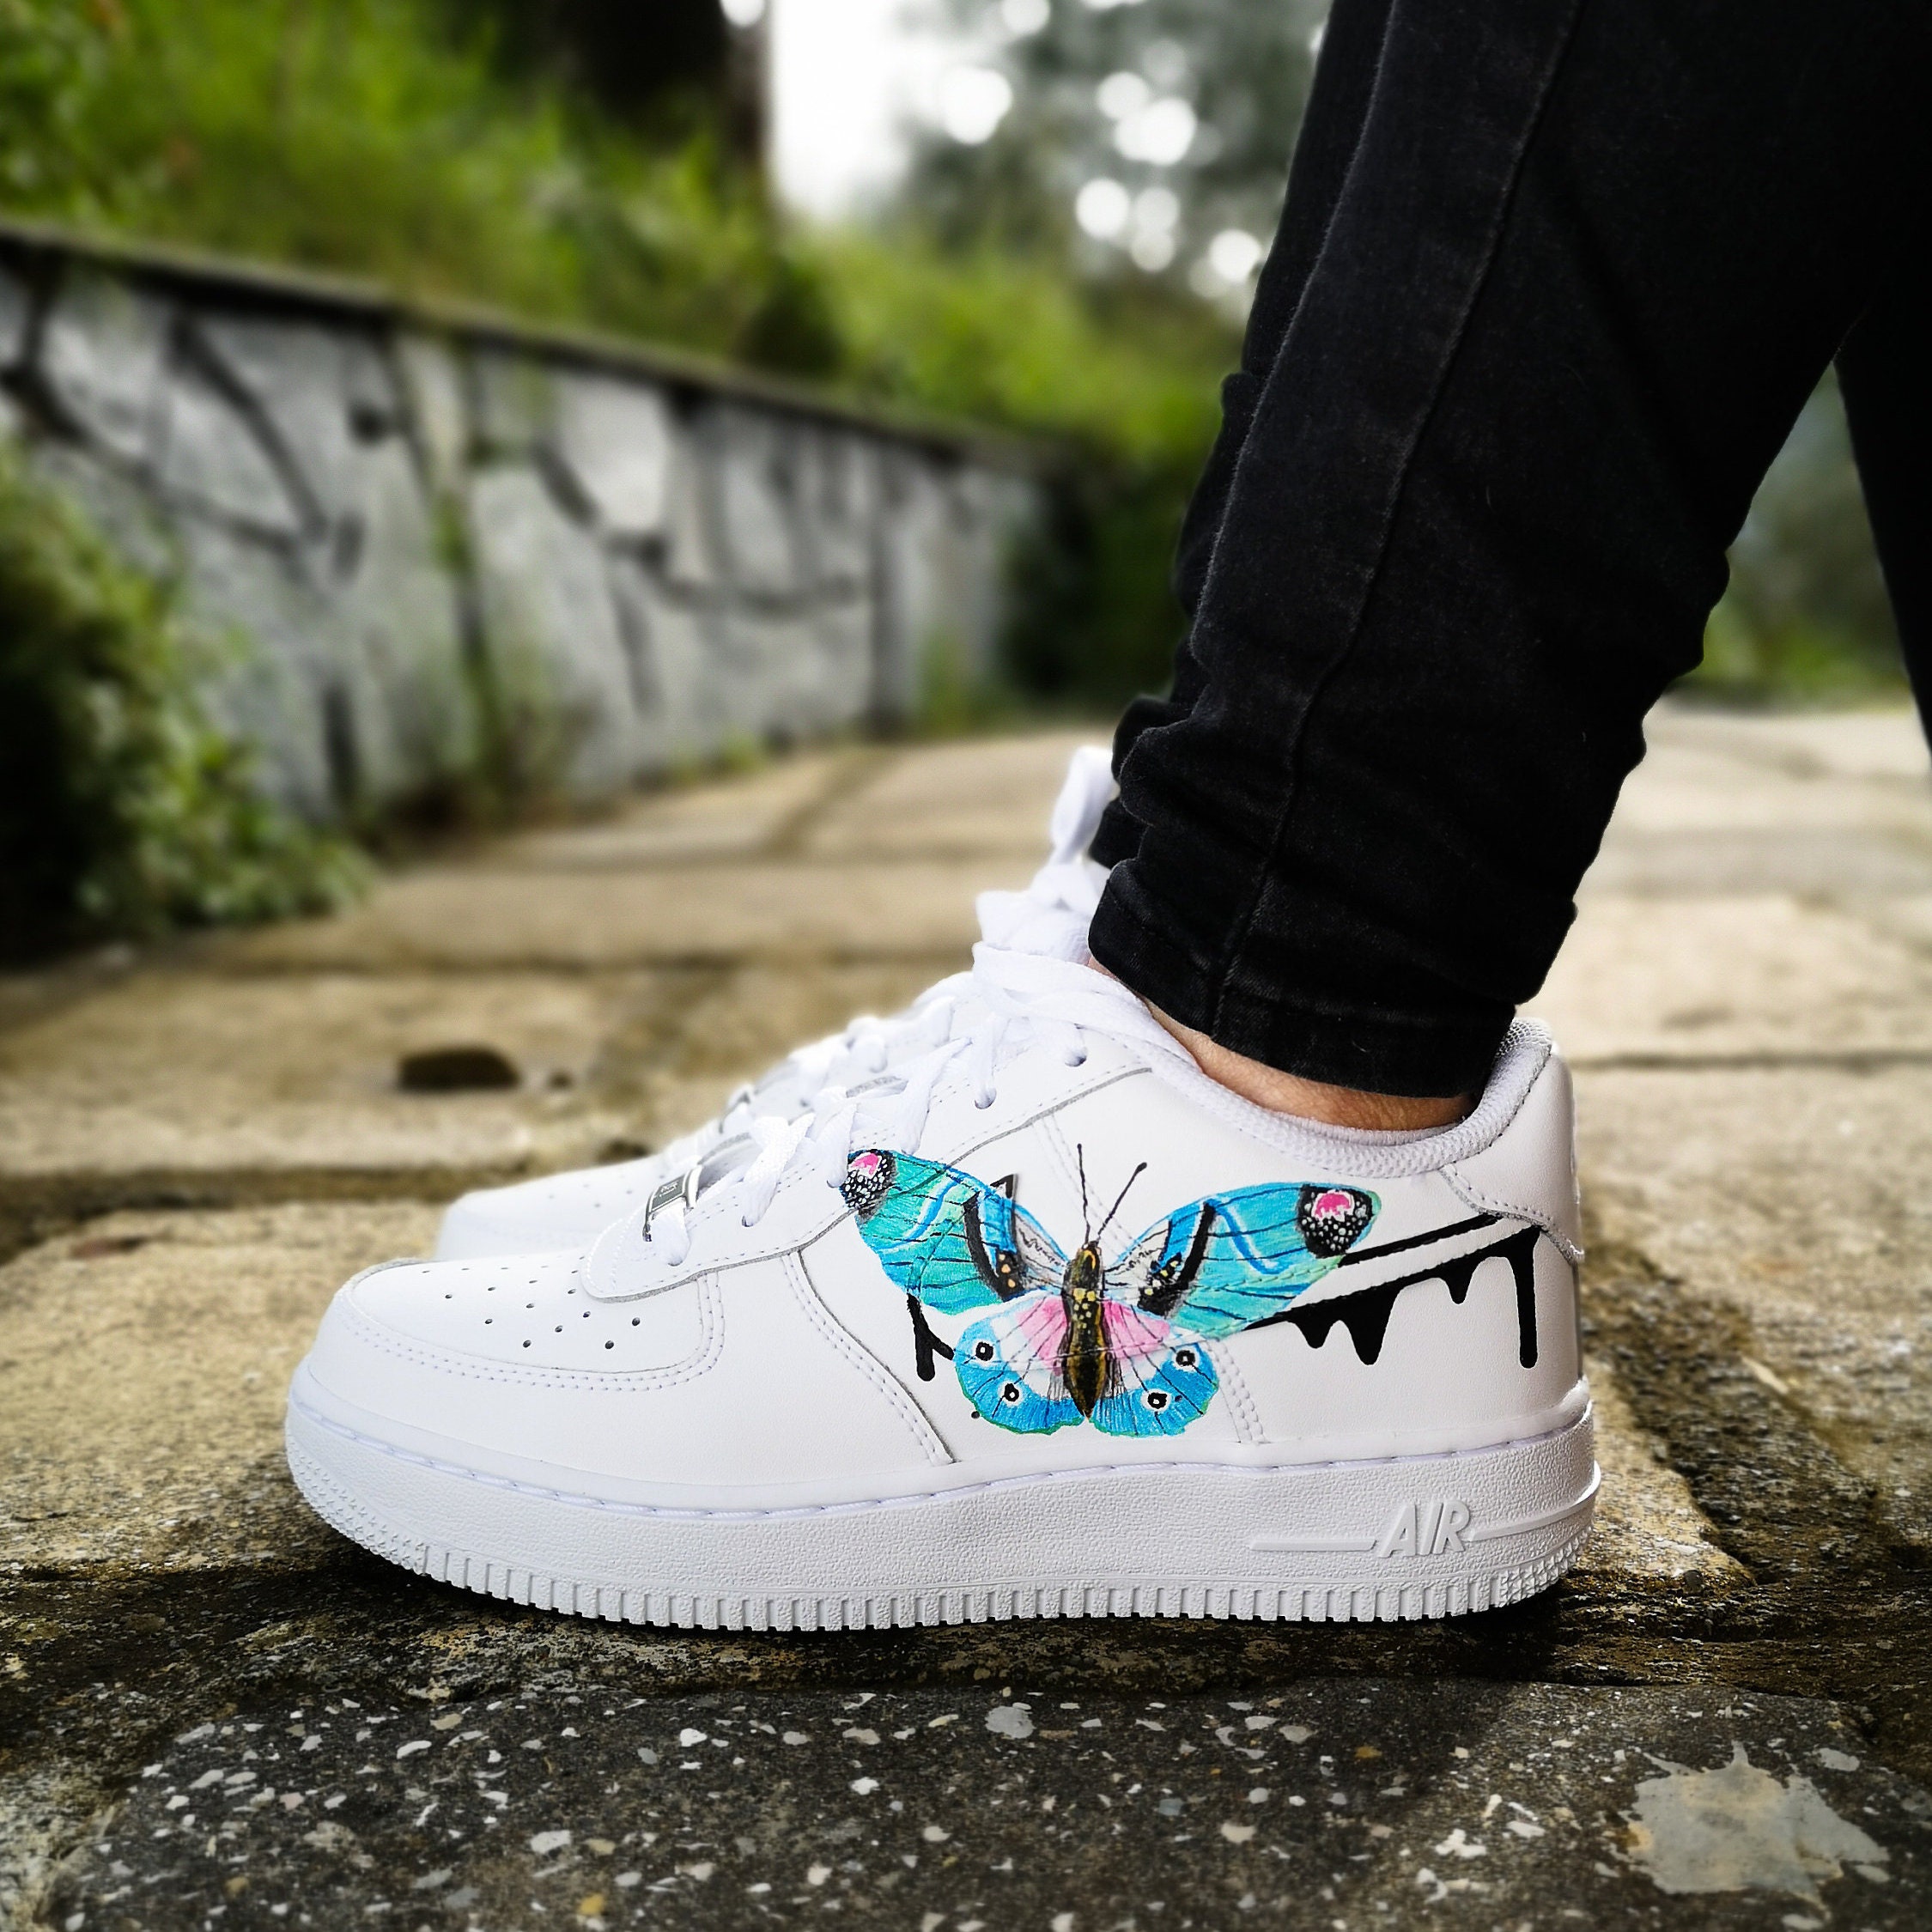 painted air force ones butterfly